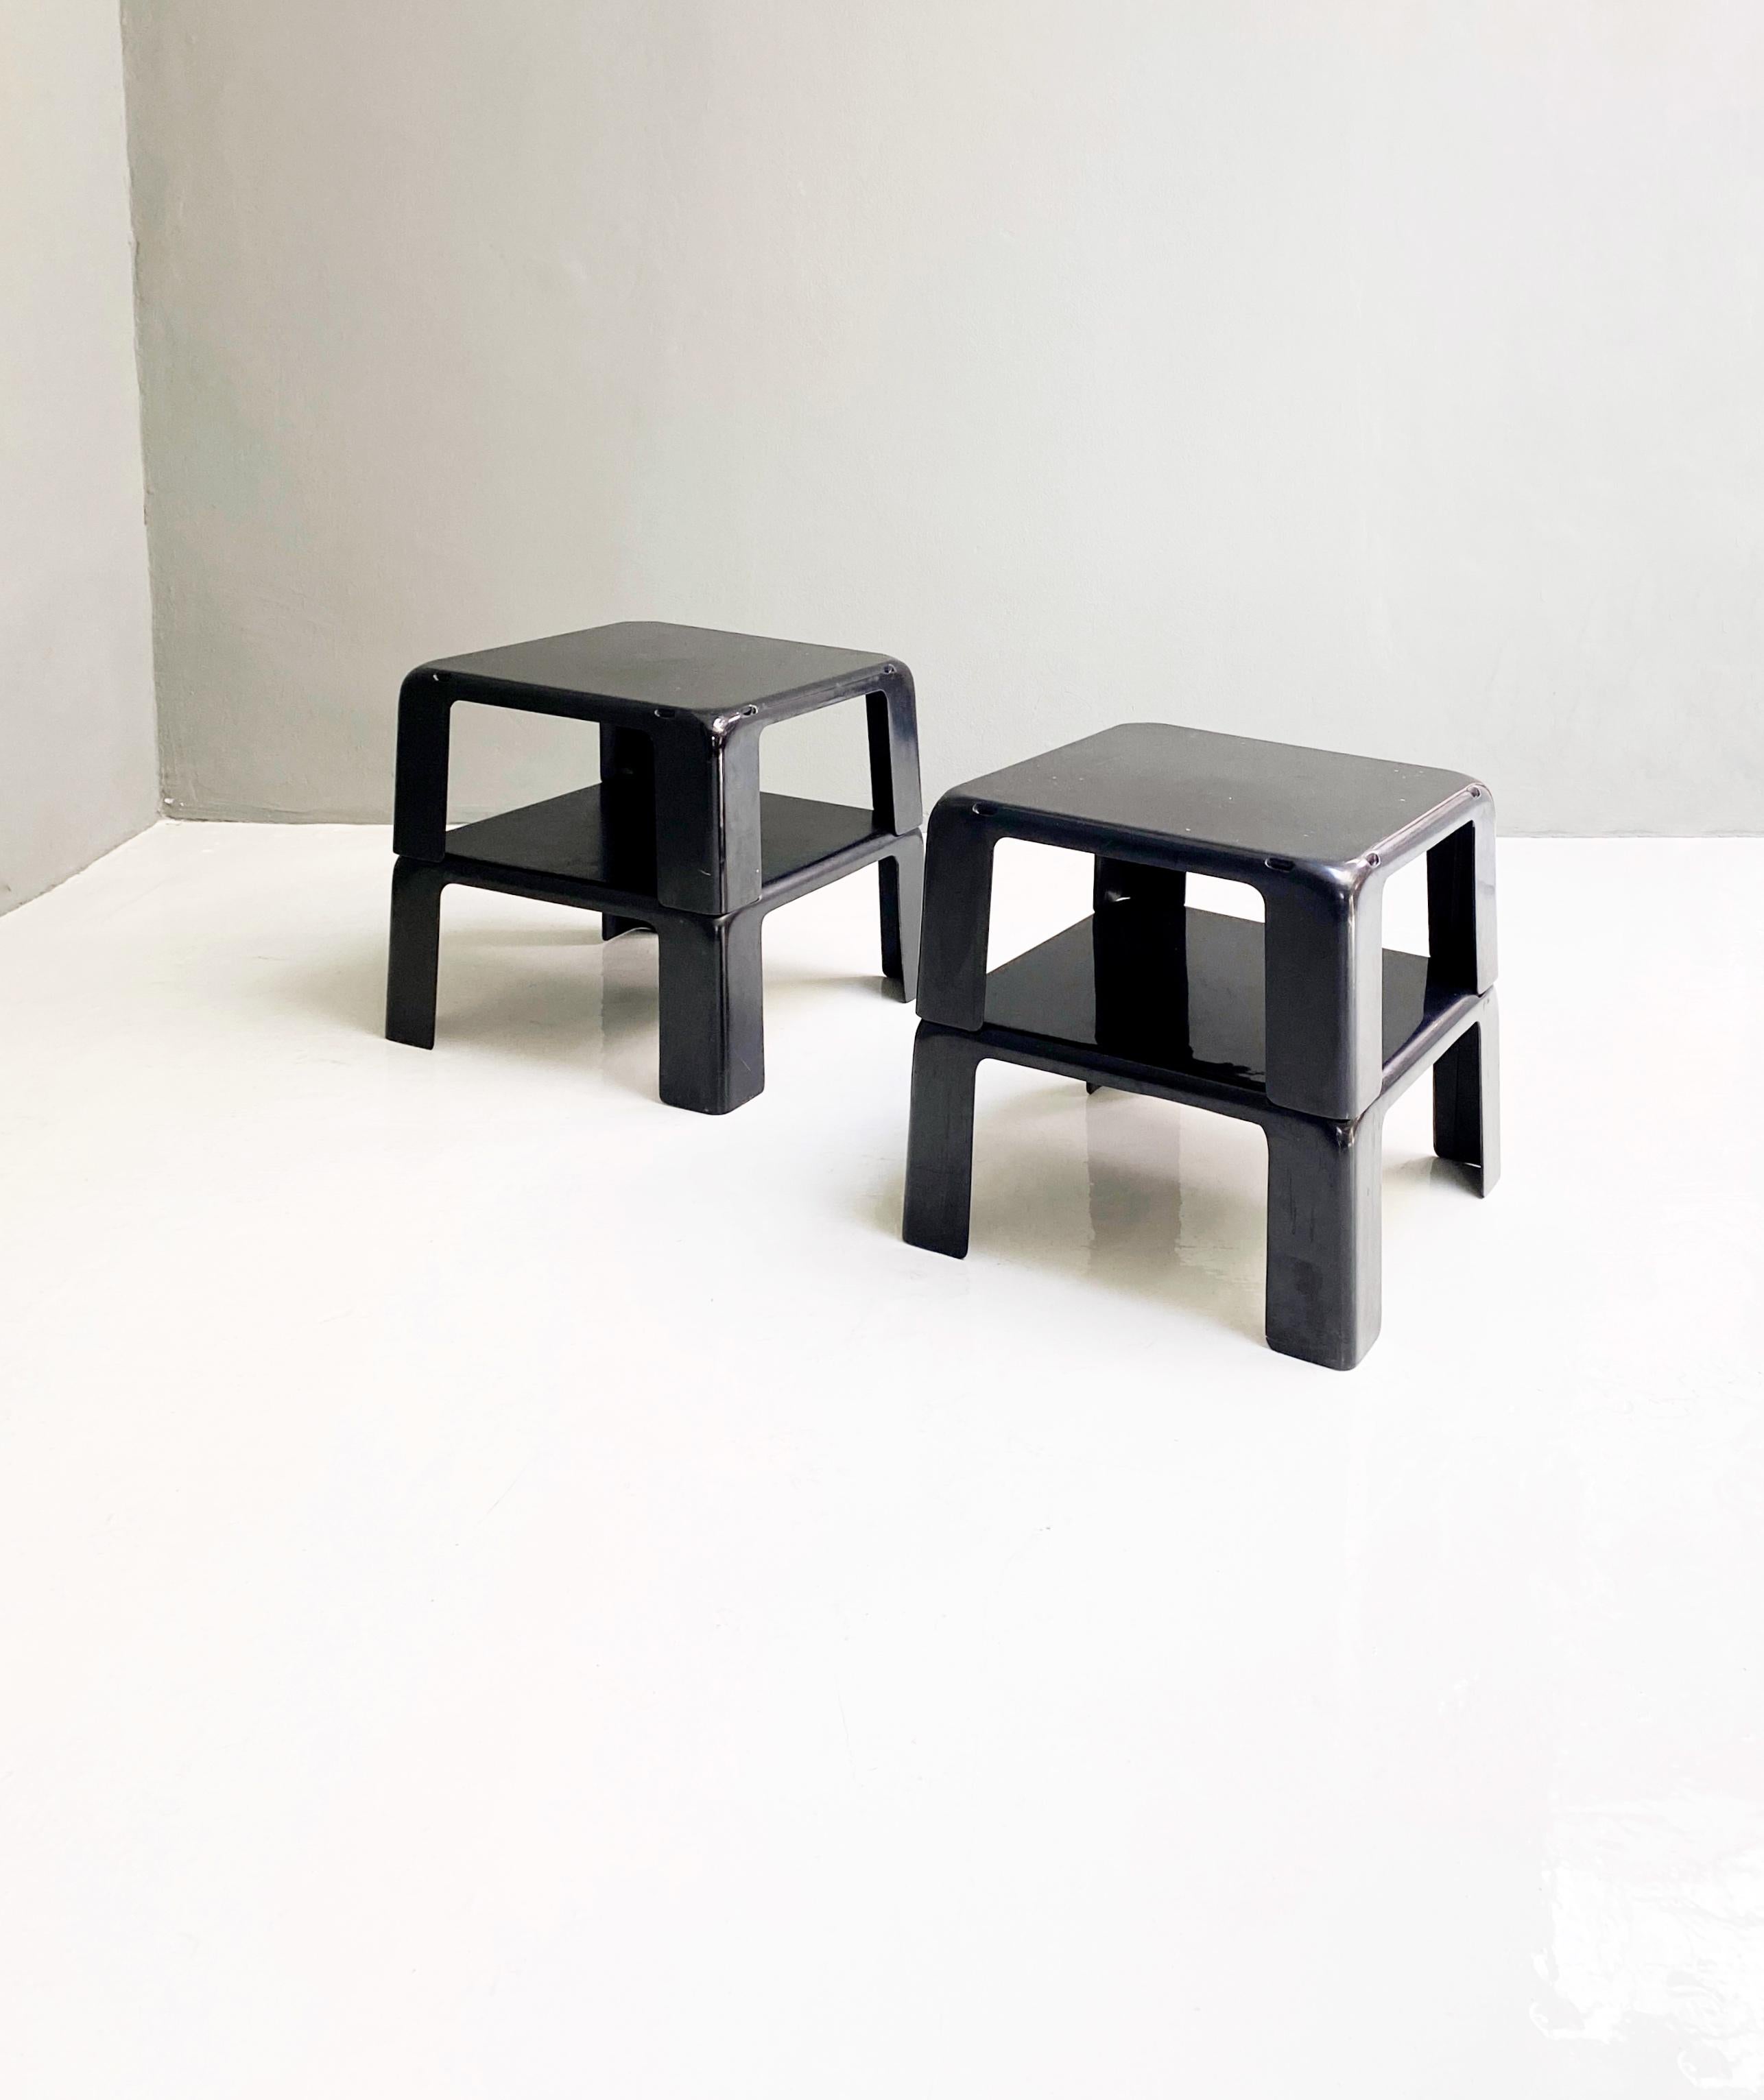 Black plastic coffee tables 4 Gatti by Mario Bellini for B&B, 1970s
Square 4 Gatti coffee tables in black plastic, stackable through holes on the perimeter of the top. Produced by B&B in 1970s and designed by Mario Bellini, with brand on the